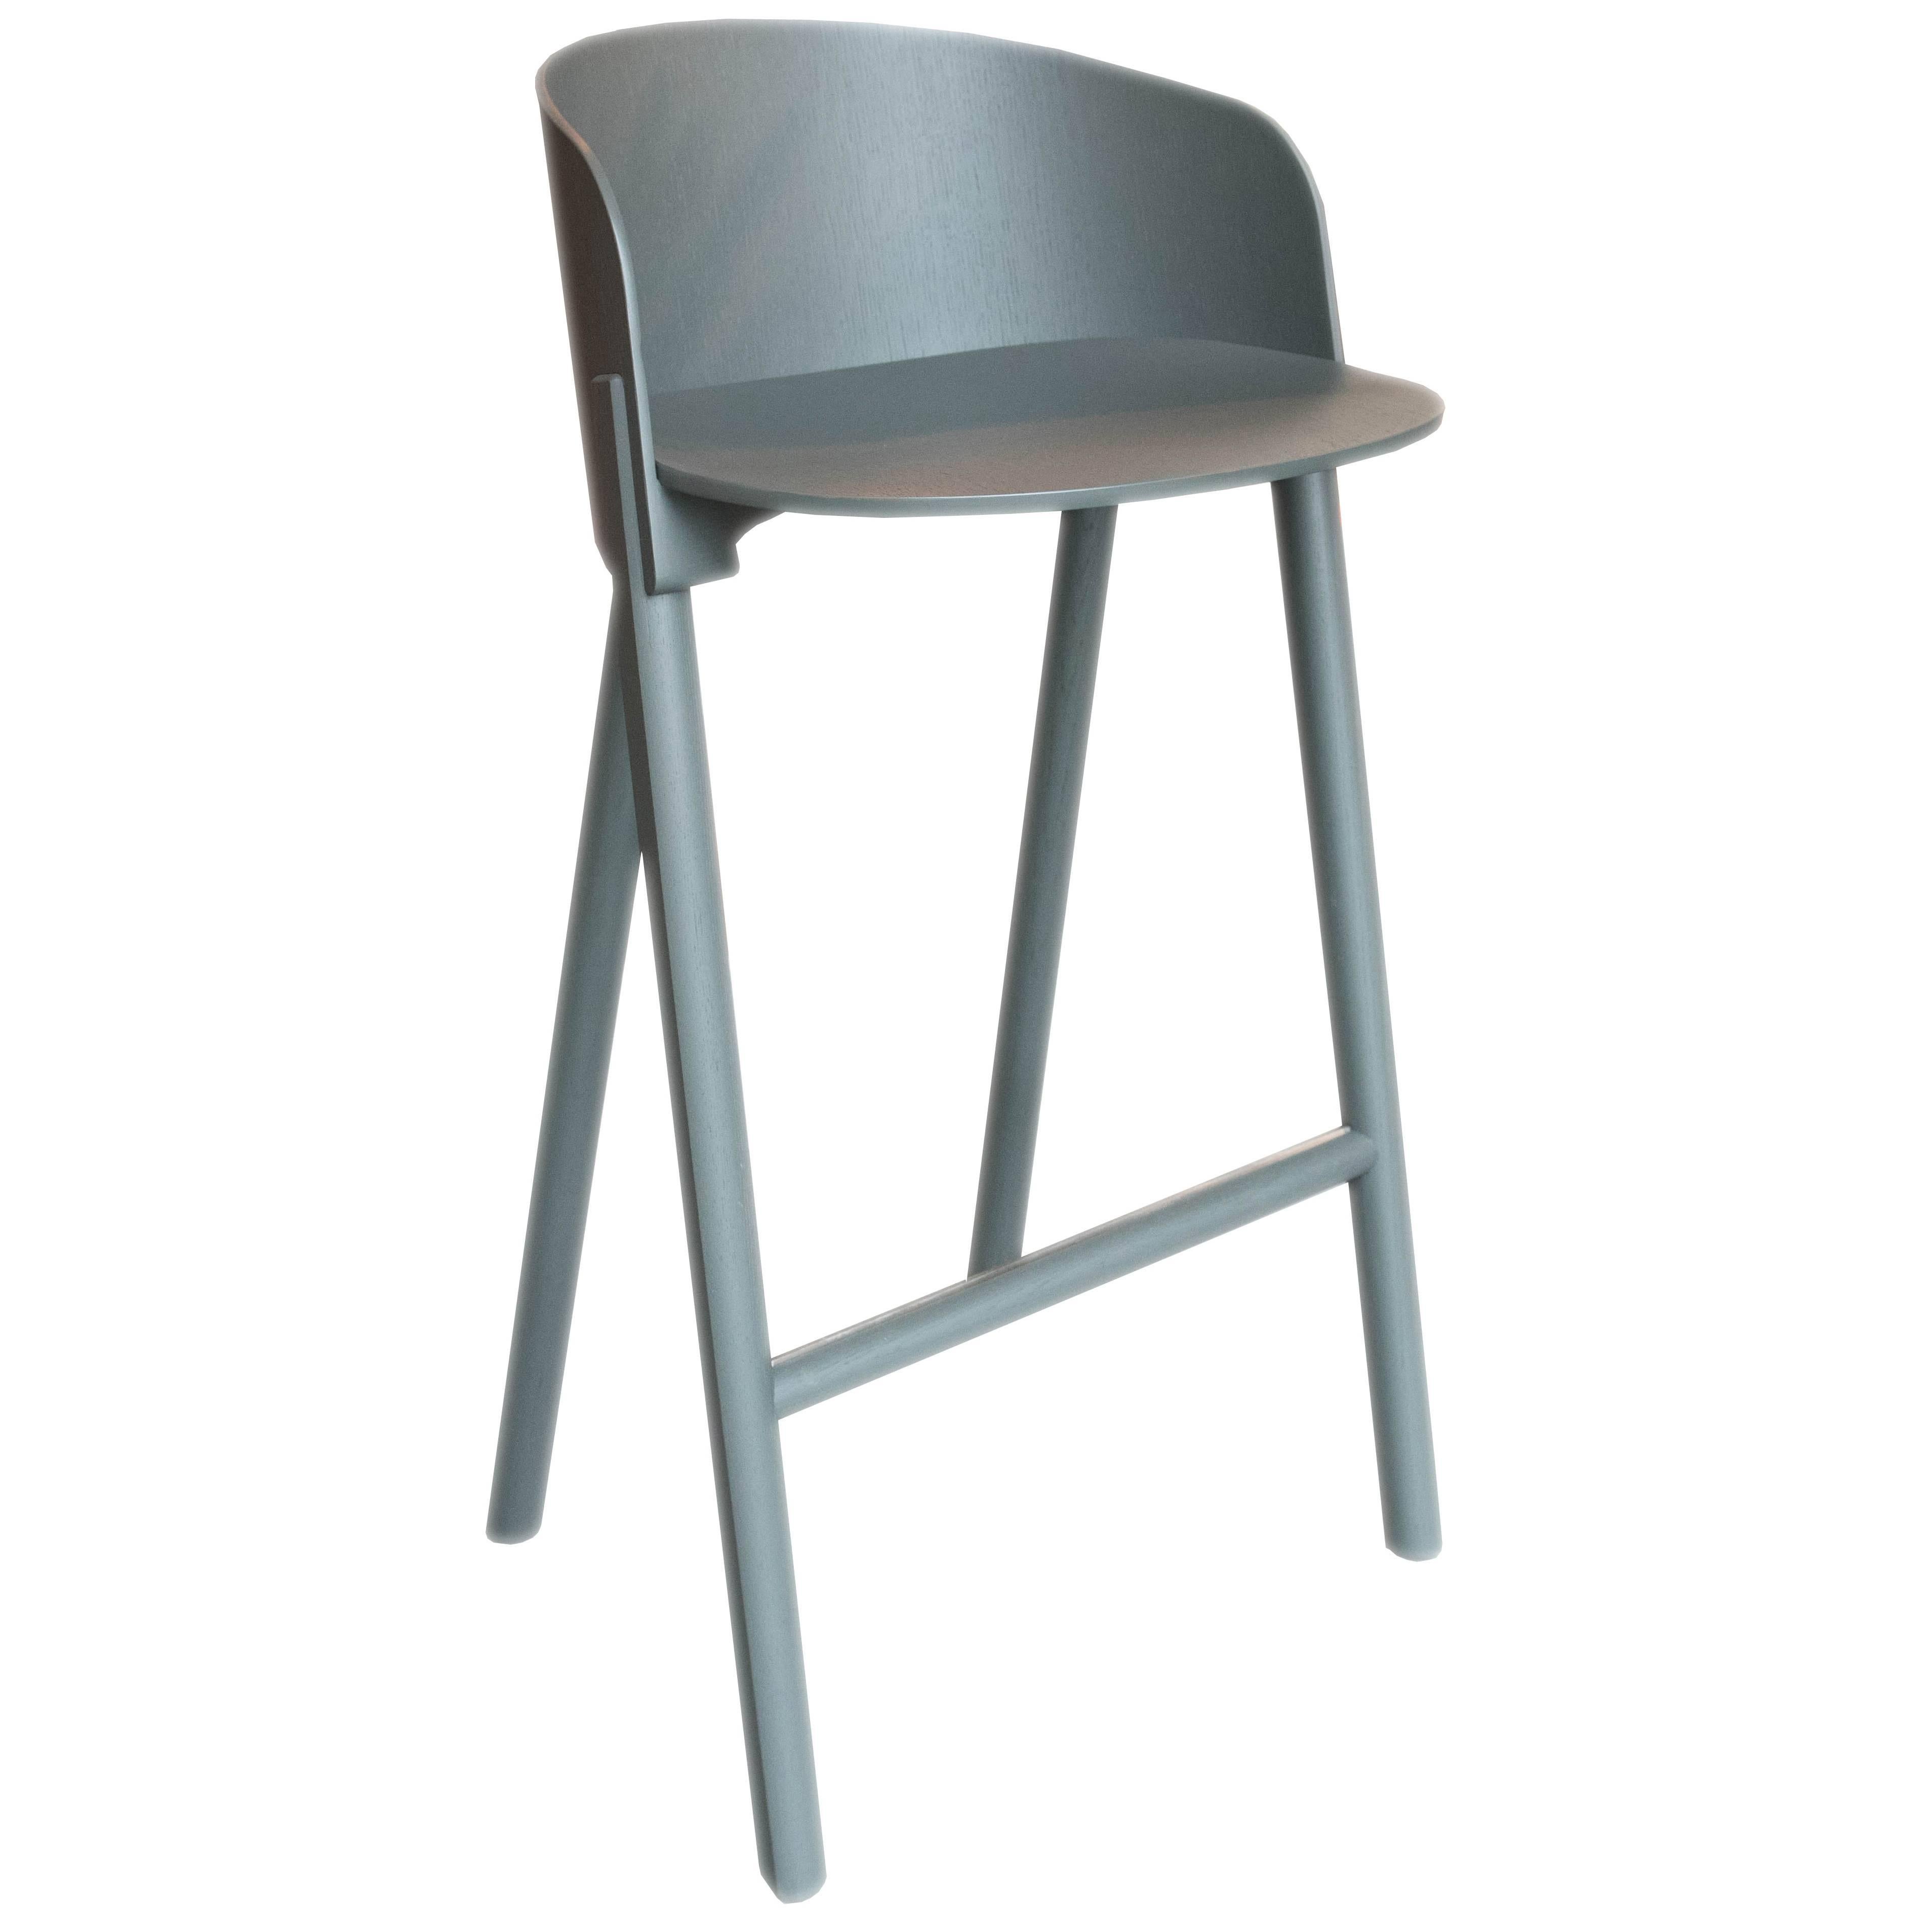 e15 "Other" Stool For Sale